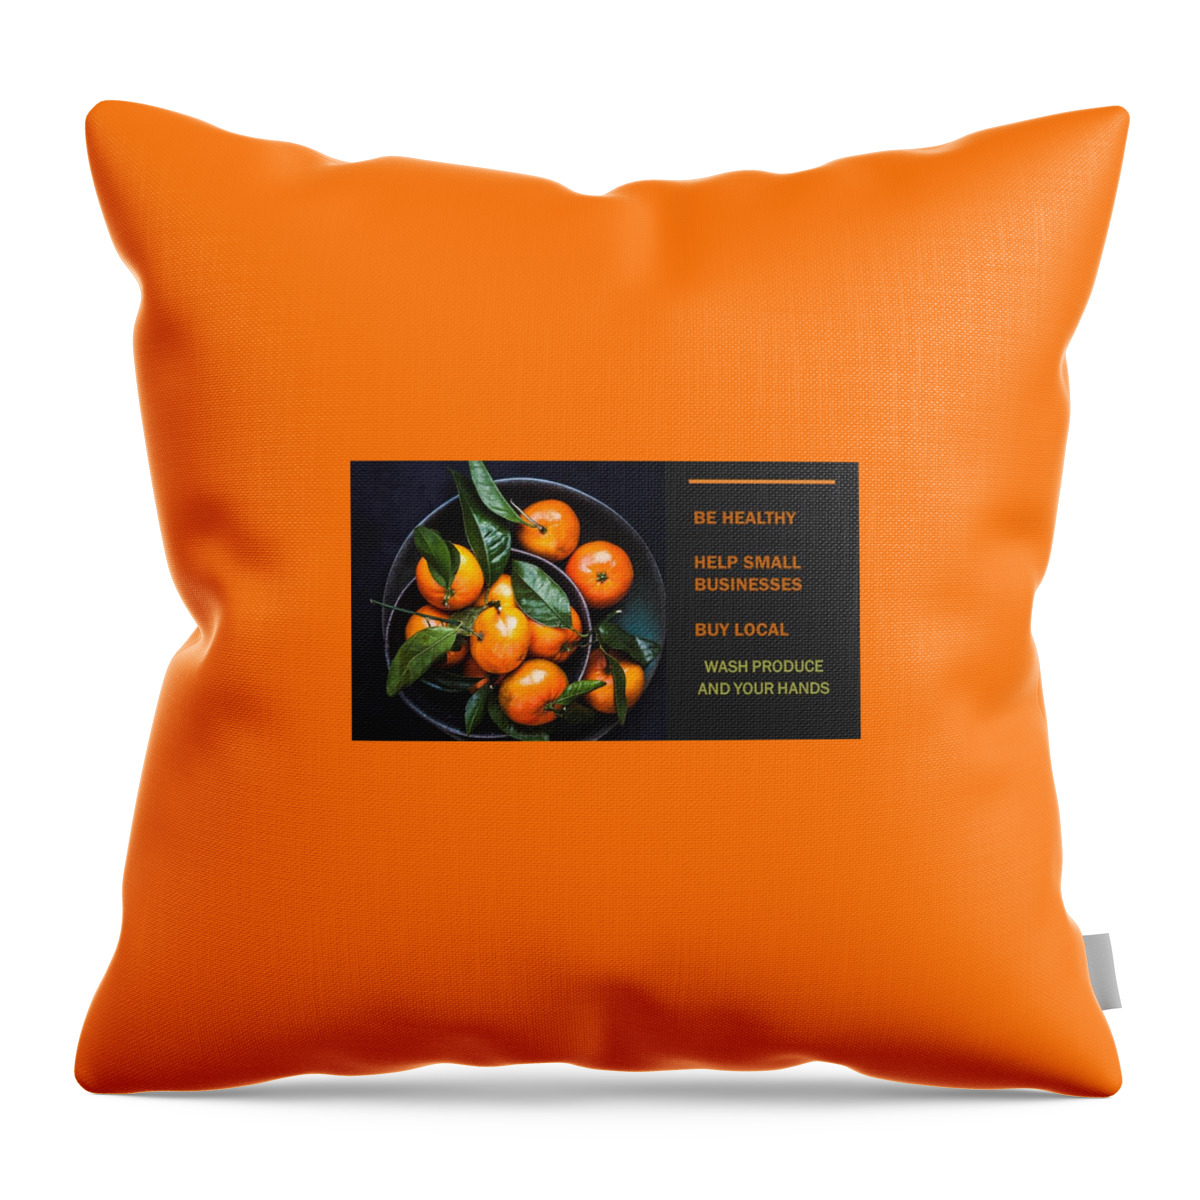 Buy Local Throw Pillow featuring the photograph Buy Local Produce by Nancy Ayanna Wyatt